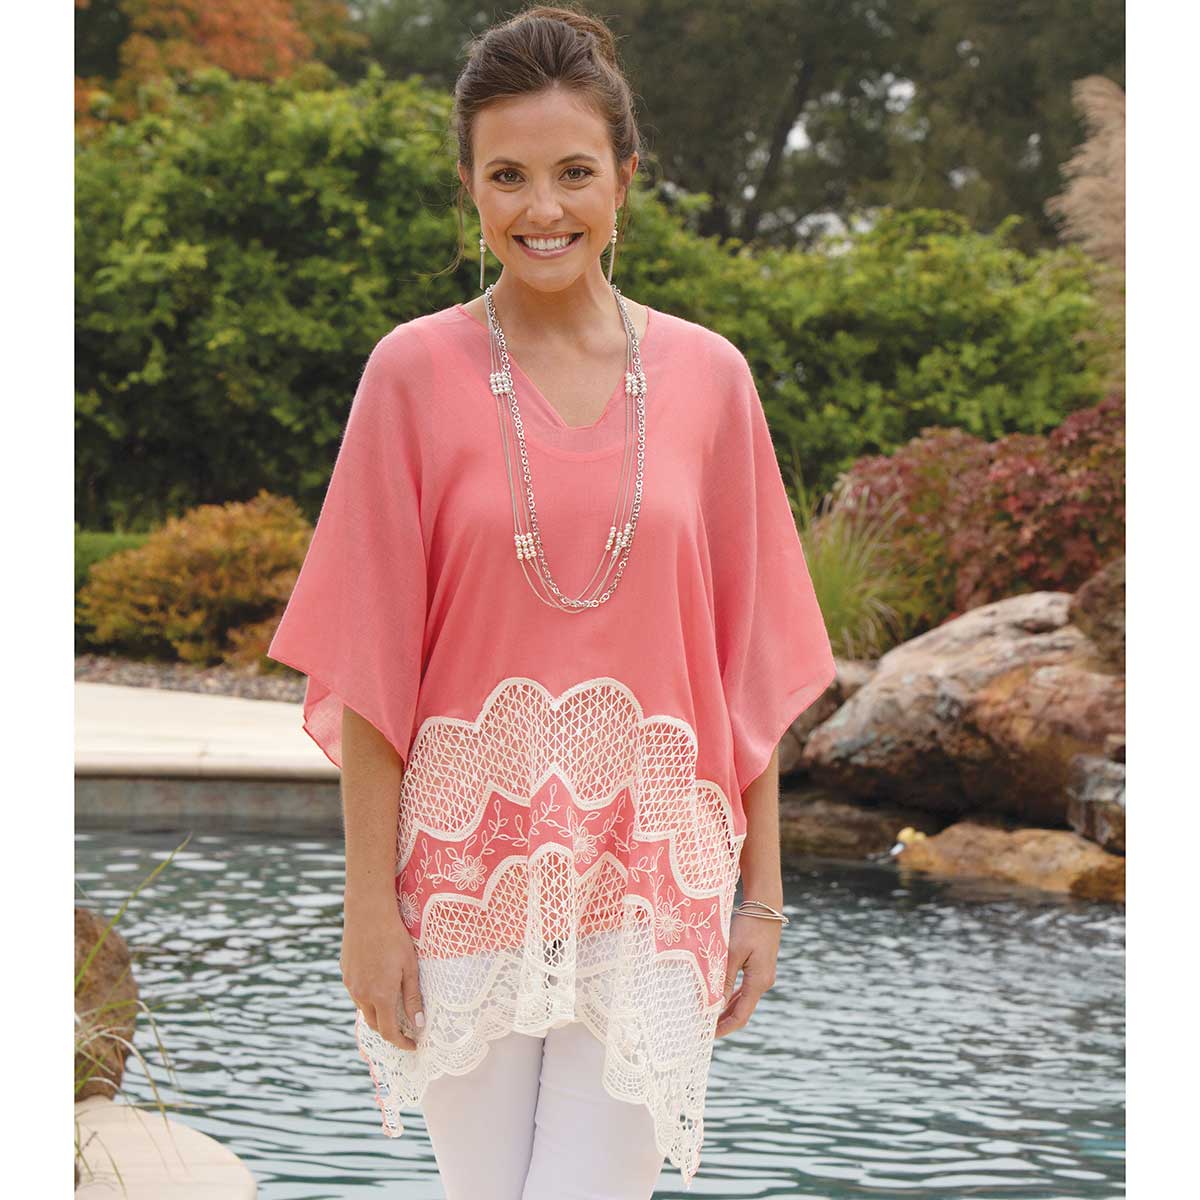 Coral Tunic with Cream Lace Trim 35"x29.5"